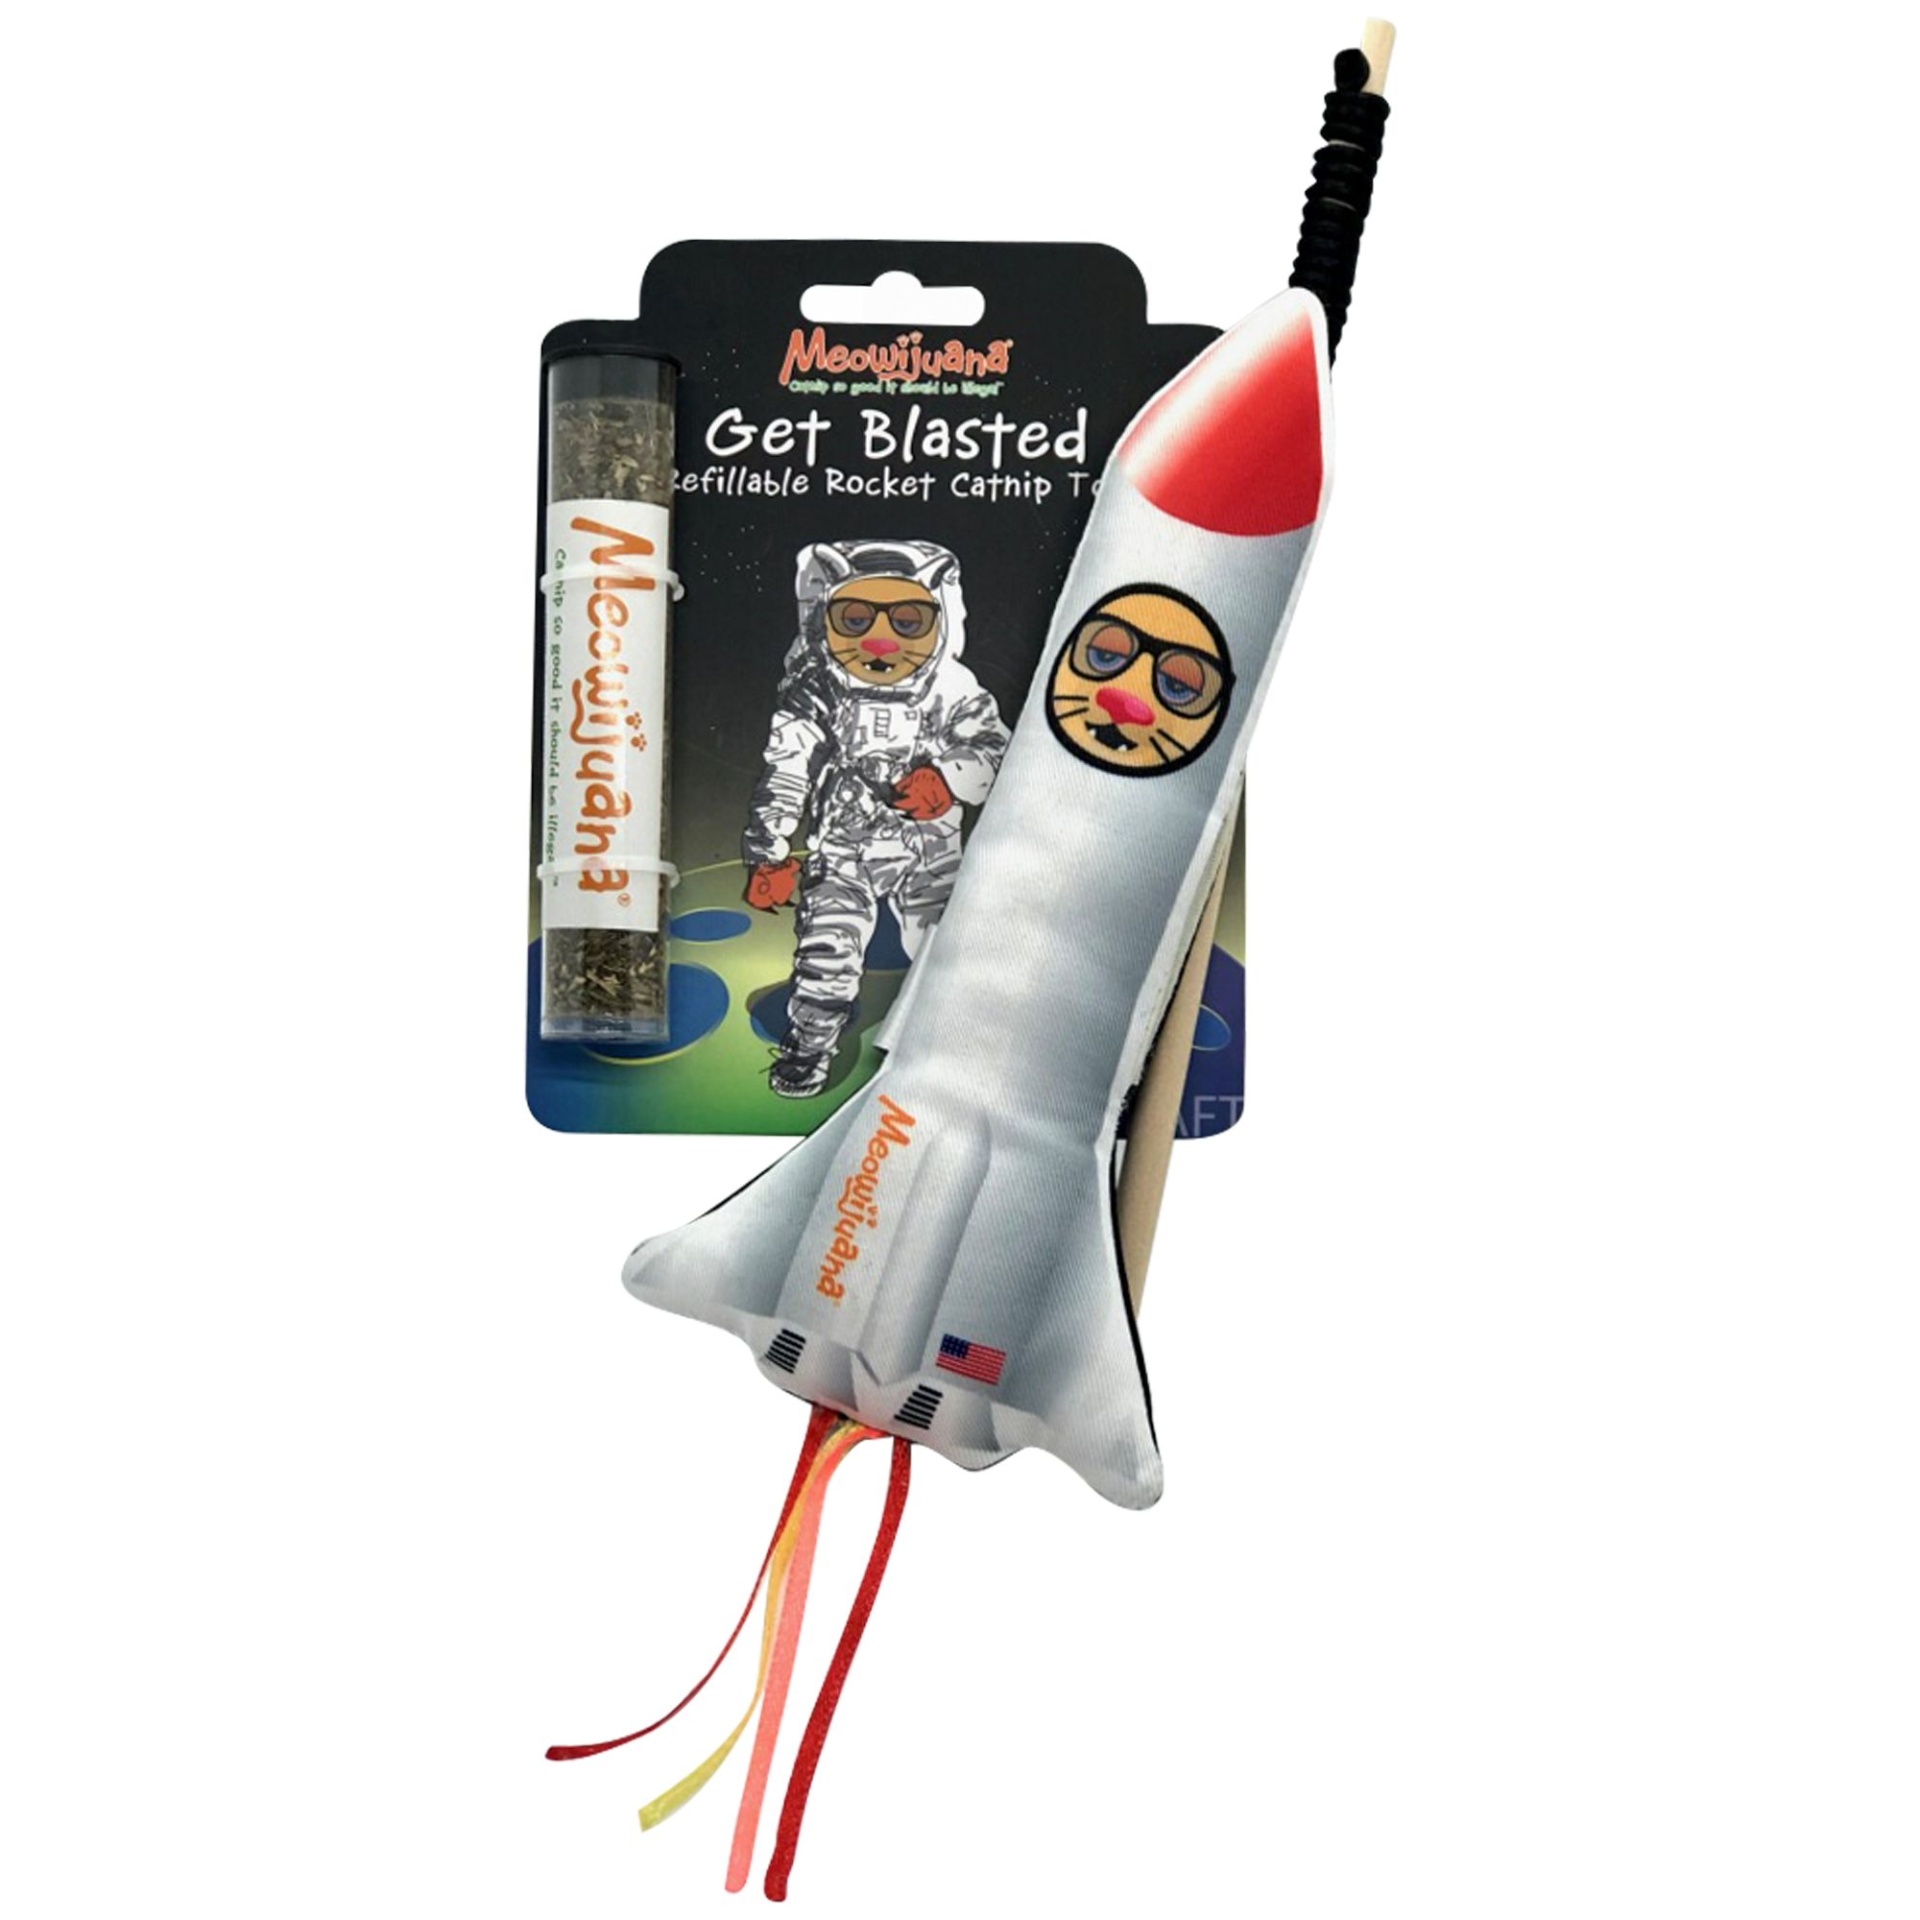 slide 1 of 1, Meowijuana Get Blasted Refillable Rocket with Wand Cat Toy, MED